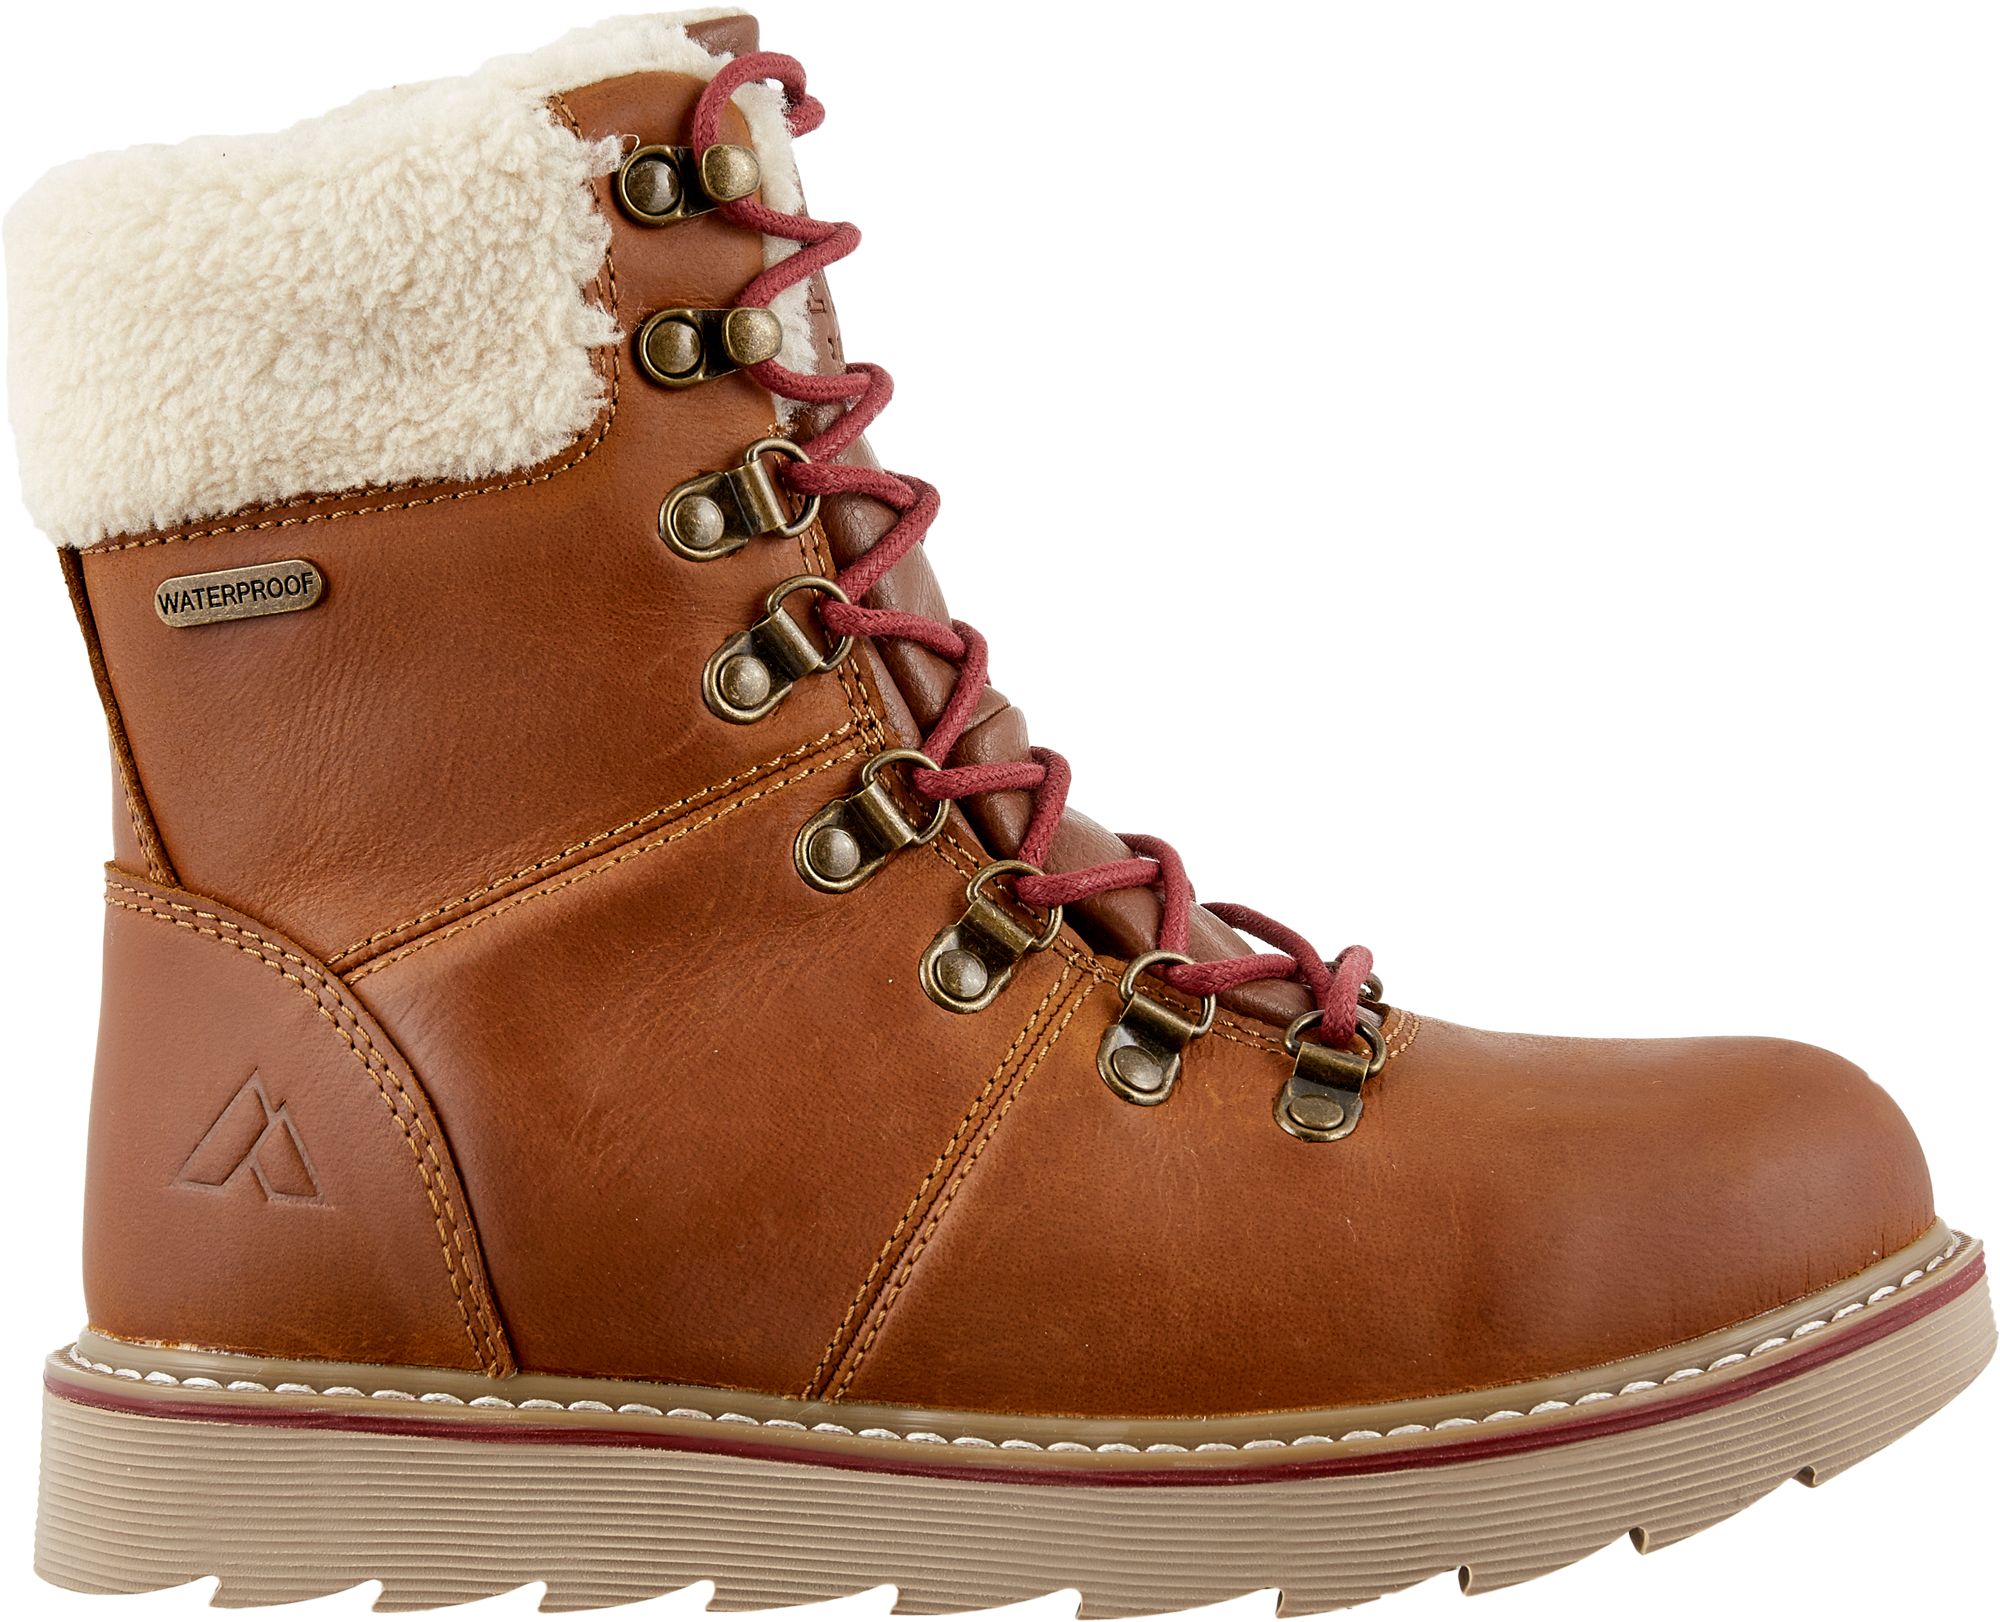 leather snow boots womens